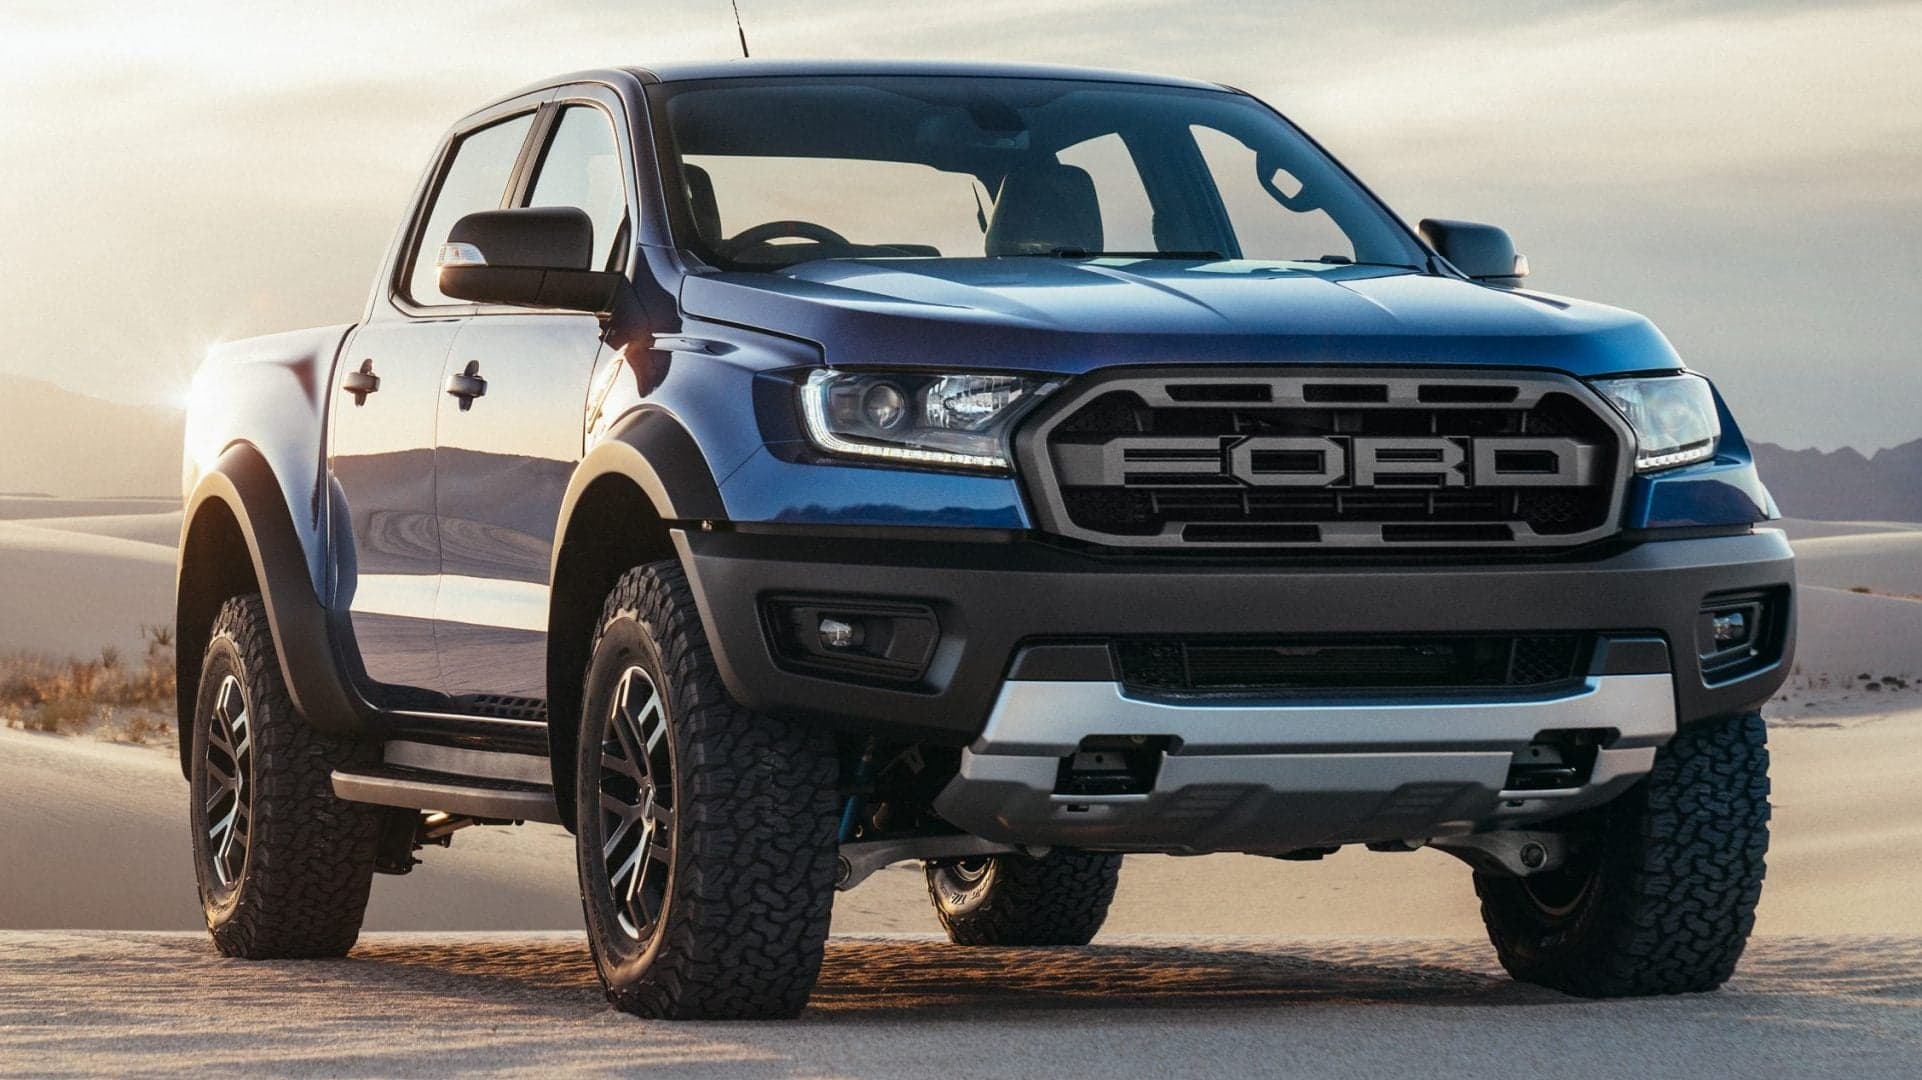 Ford Ranger Raptor Should Have Gas Power in U.S., Ford Boss Says